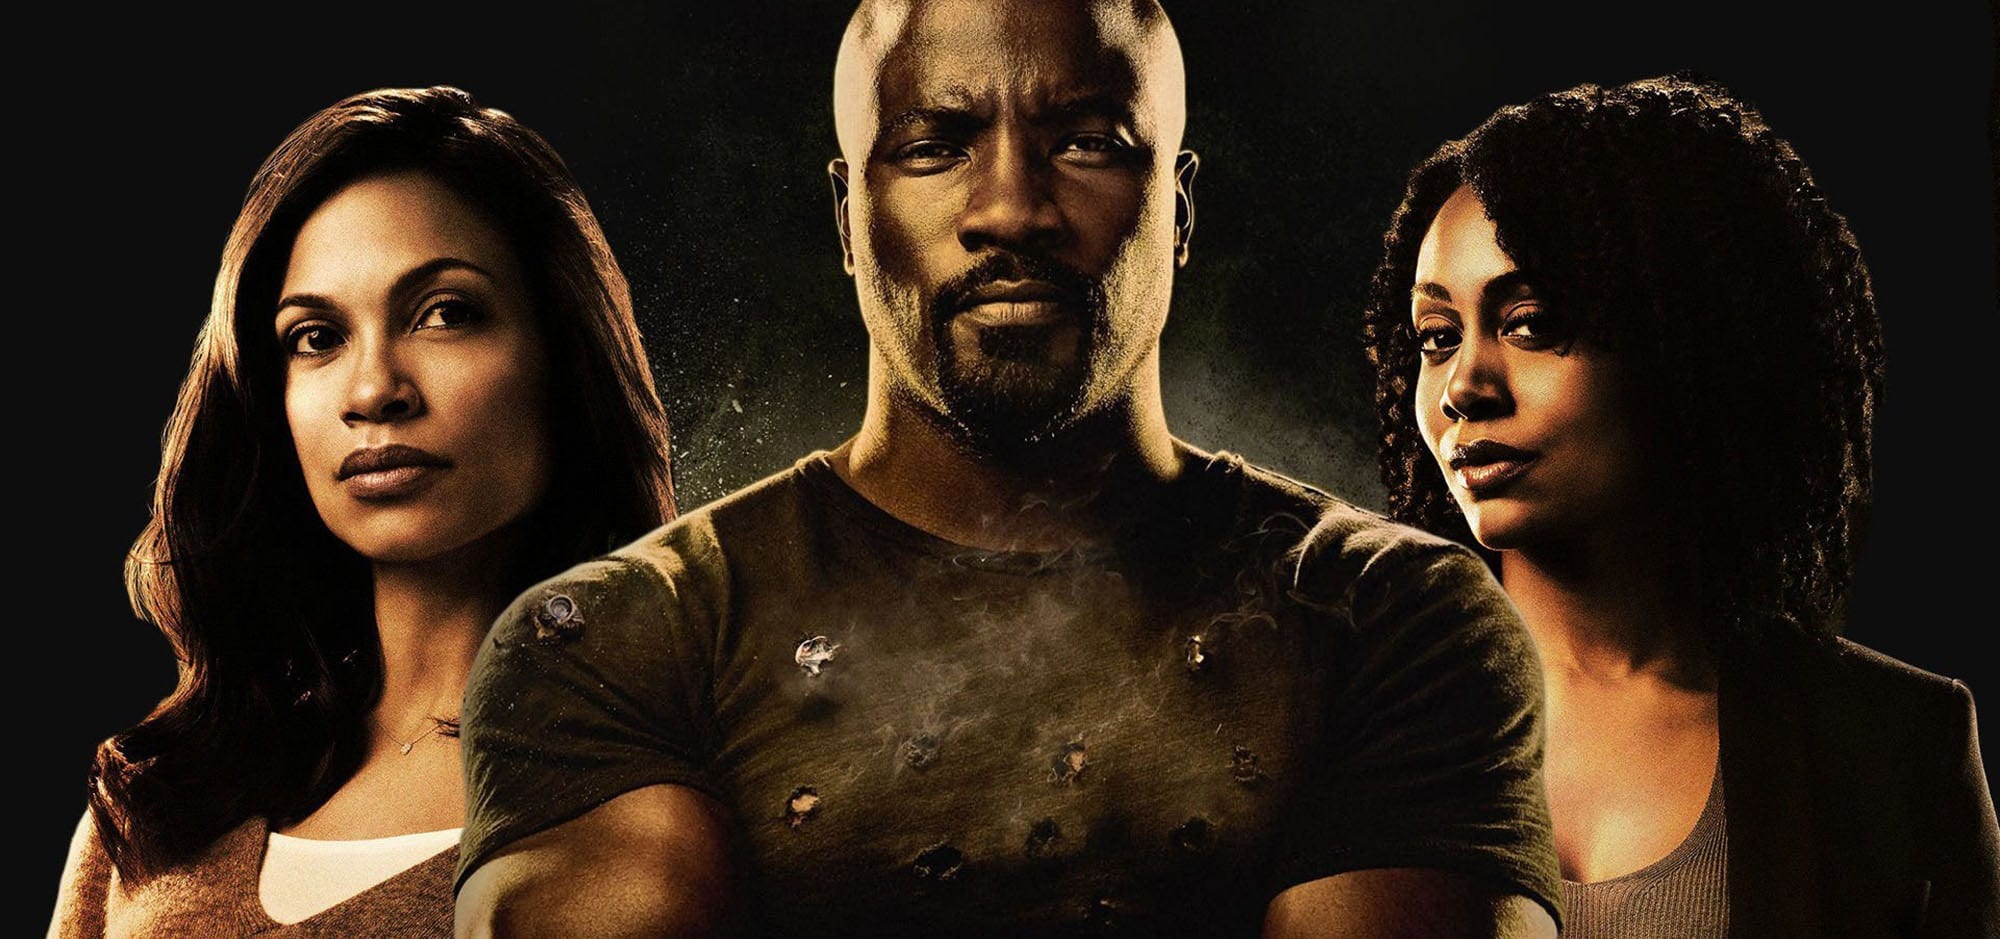 They're full of hidden dimensions of physical, mental, and emotional strength. Here are the 4 main ferocious women of 'Luke Cage' S2 and why we love them.